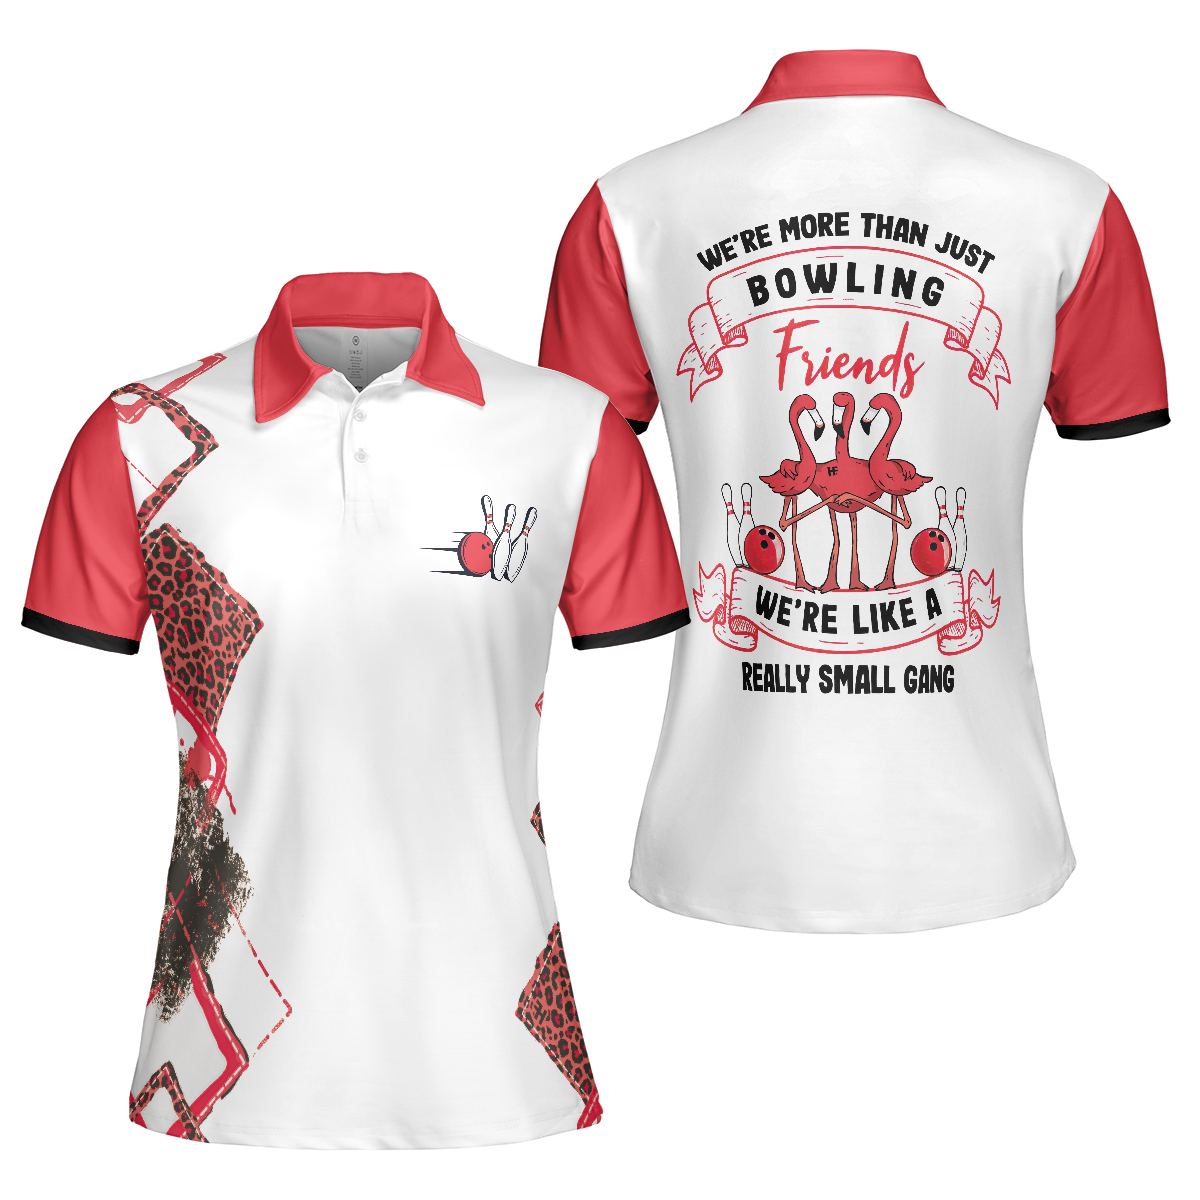 Bowling Polo Shirt, We're More Than Just Bowling Friends We're Like A Really Small Gang Short Sleeve Women Polo Shirt, Leopard Bowling Shirt - Perfect Gift For Women, Ladies